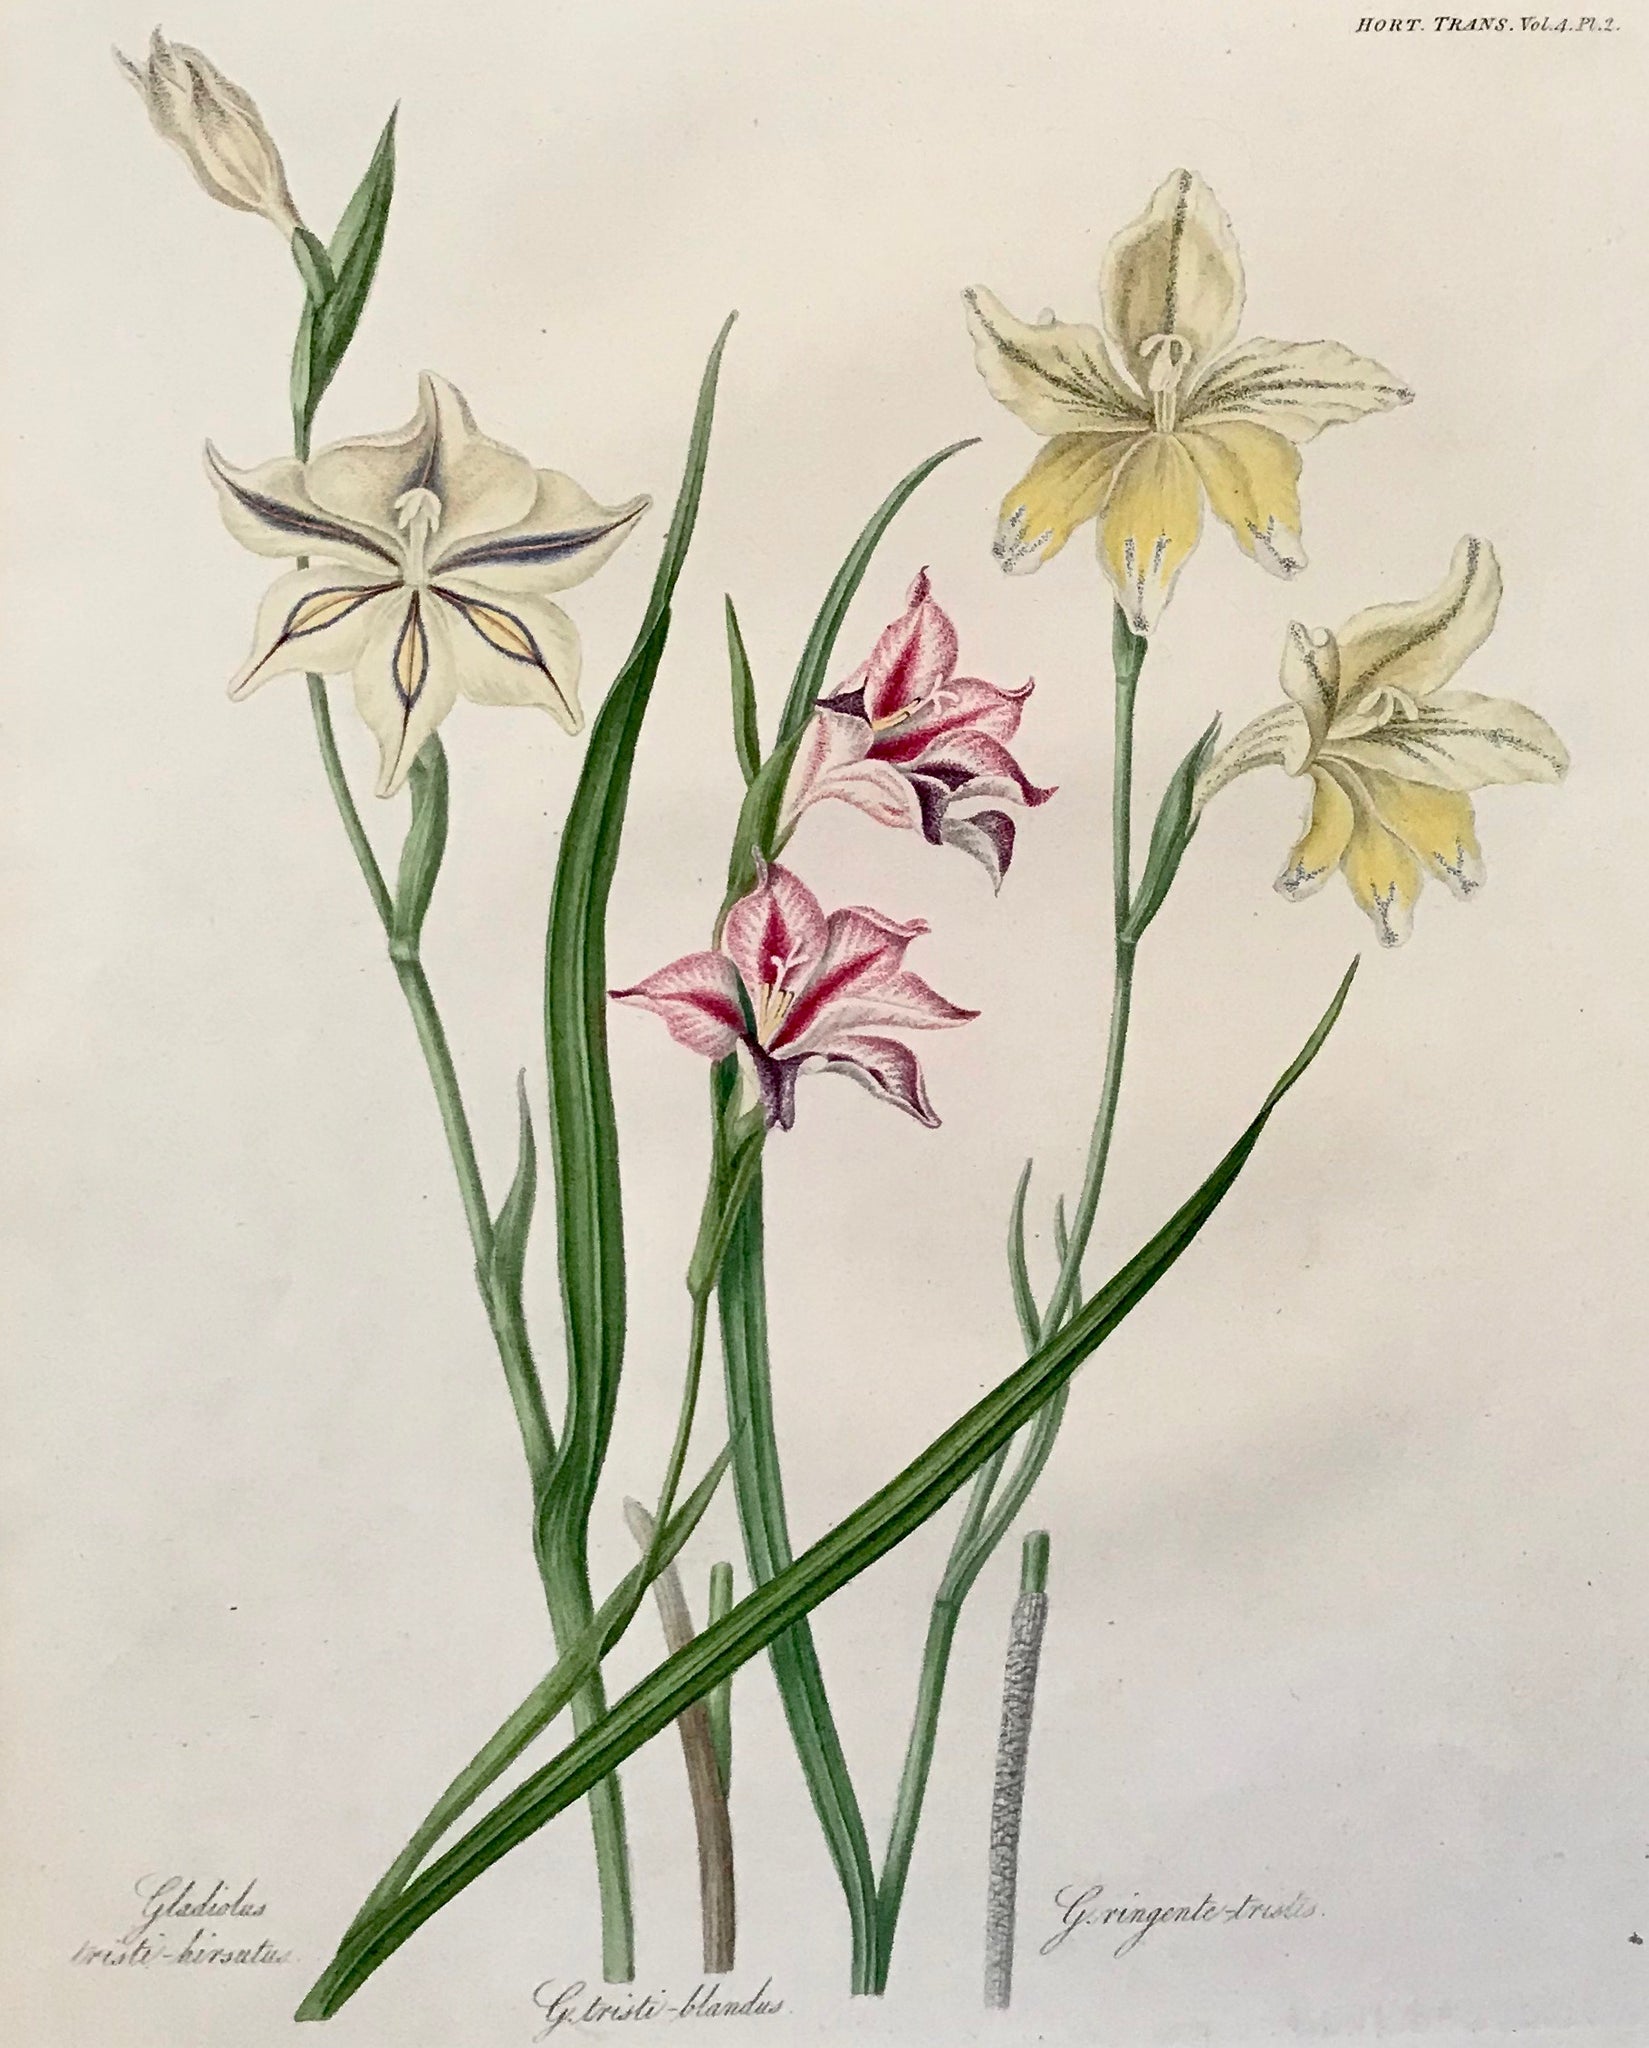 Gladiolus triste-hirsutus, Gladiolus-blanches, Gladiolus ringente-tristes  Steel aquatint in original hand coloring for the "Transactions" of the Royal Horticultural Society of London. Ca 1820.  Slightly uneven edges.